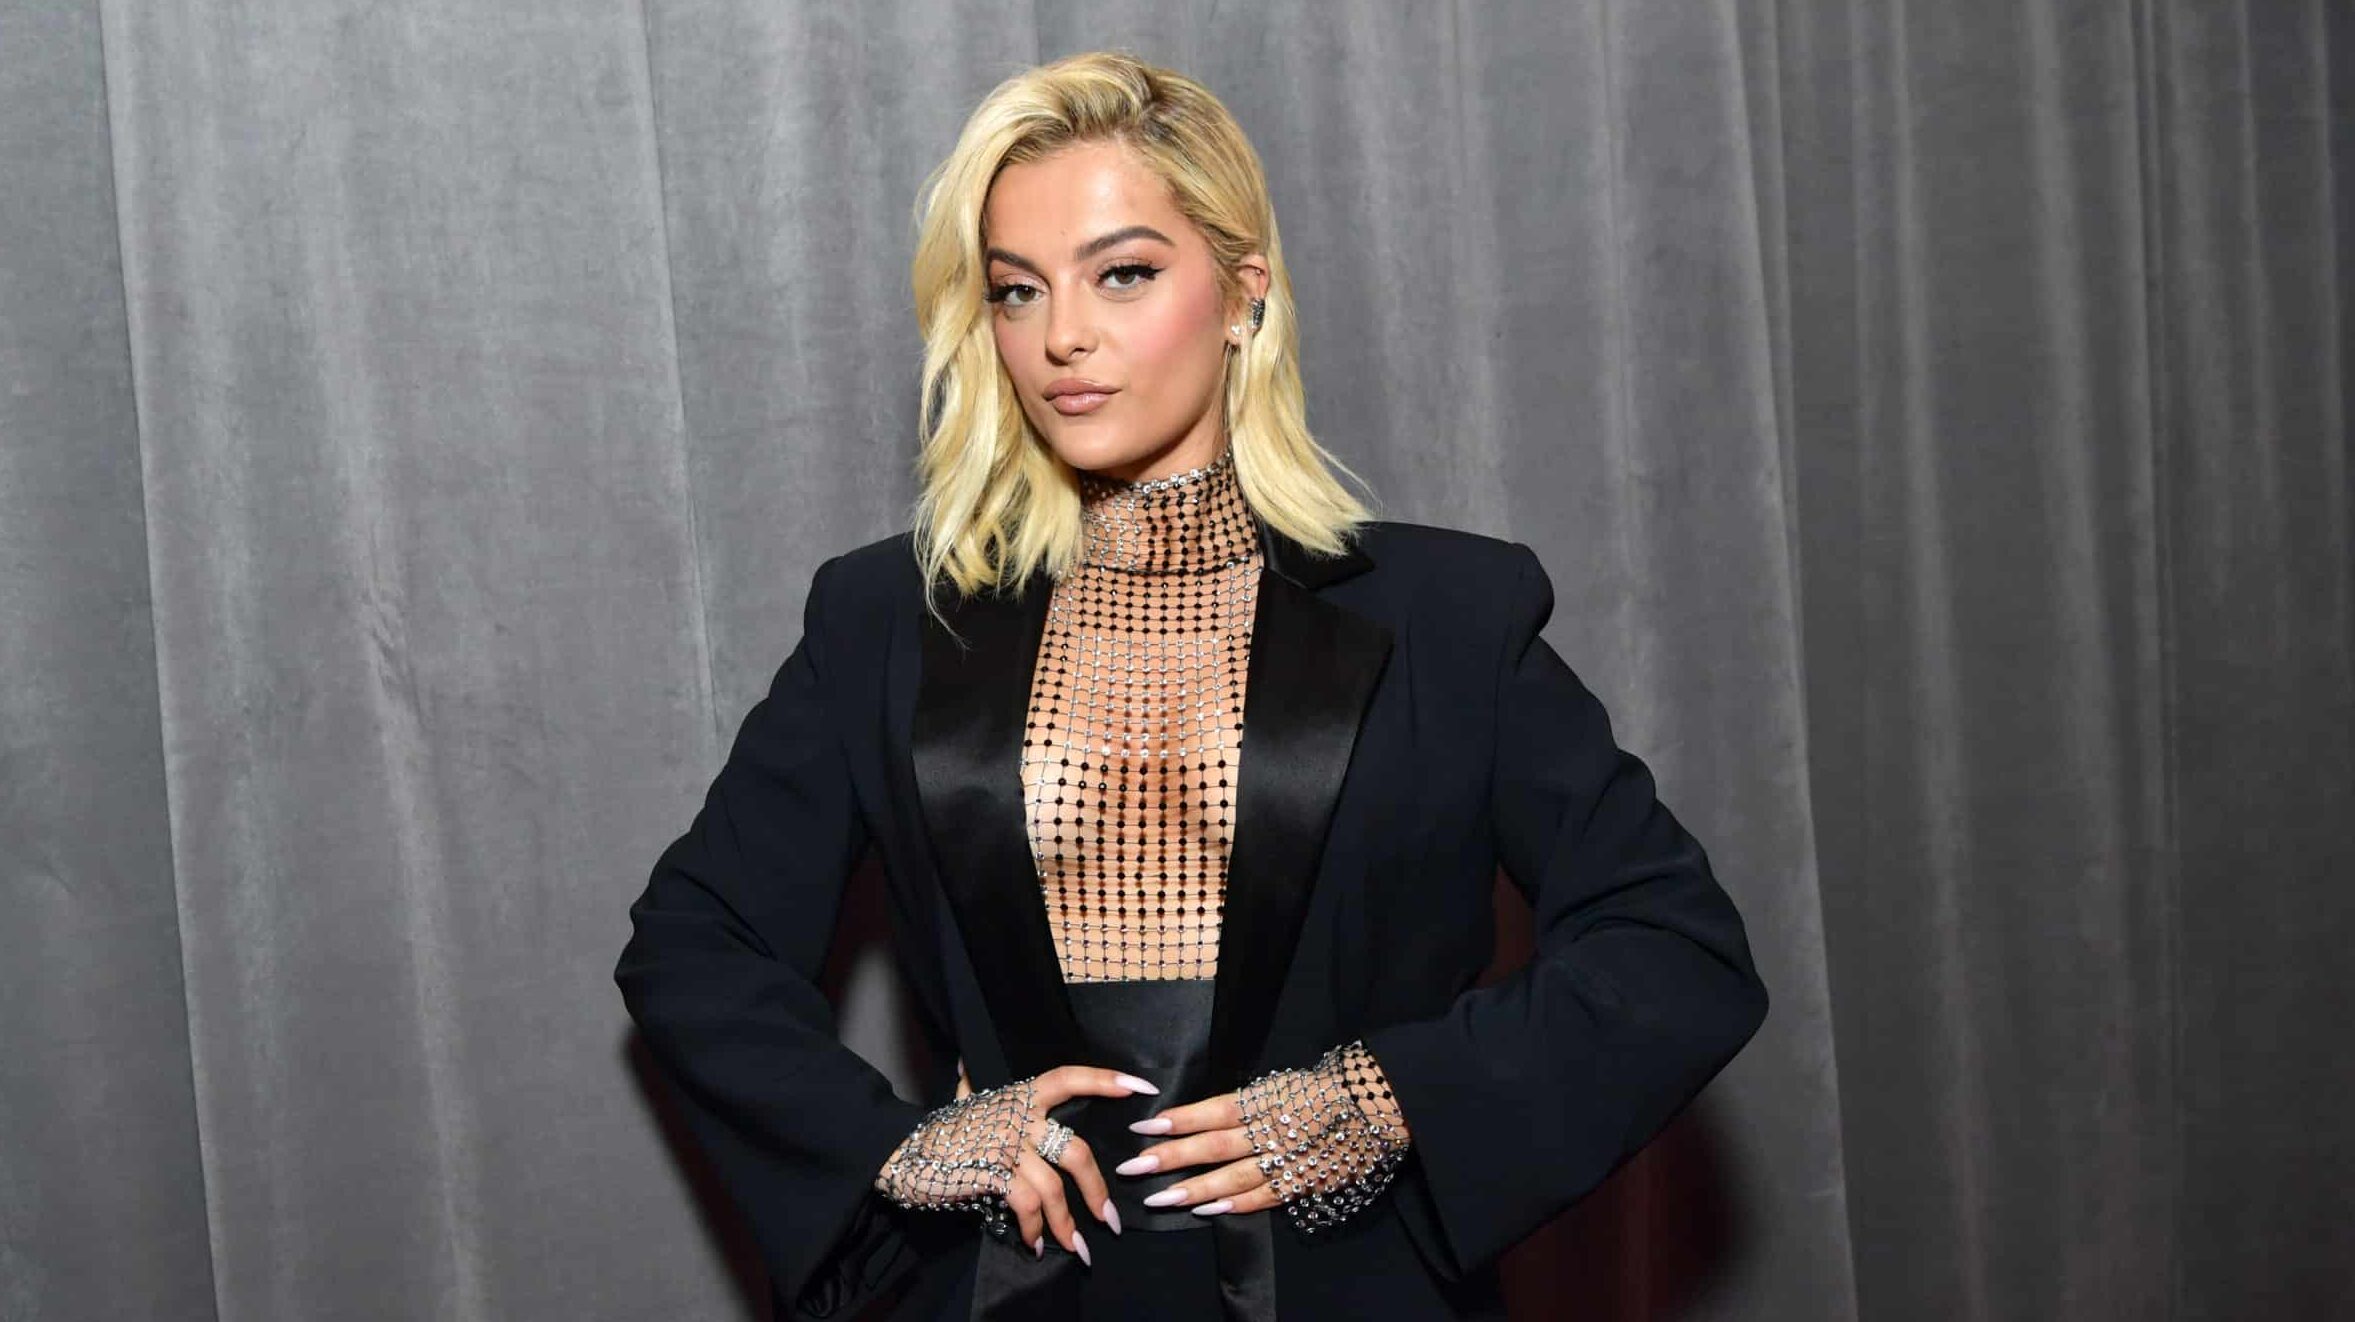 Bebe Rexha attends the 62nd Annual GRAMMY Awards at STAPLES Center on January 26, 2020 in Los Angeles, California.